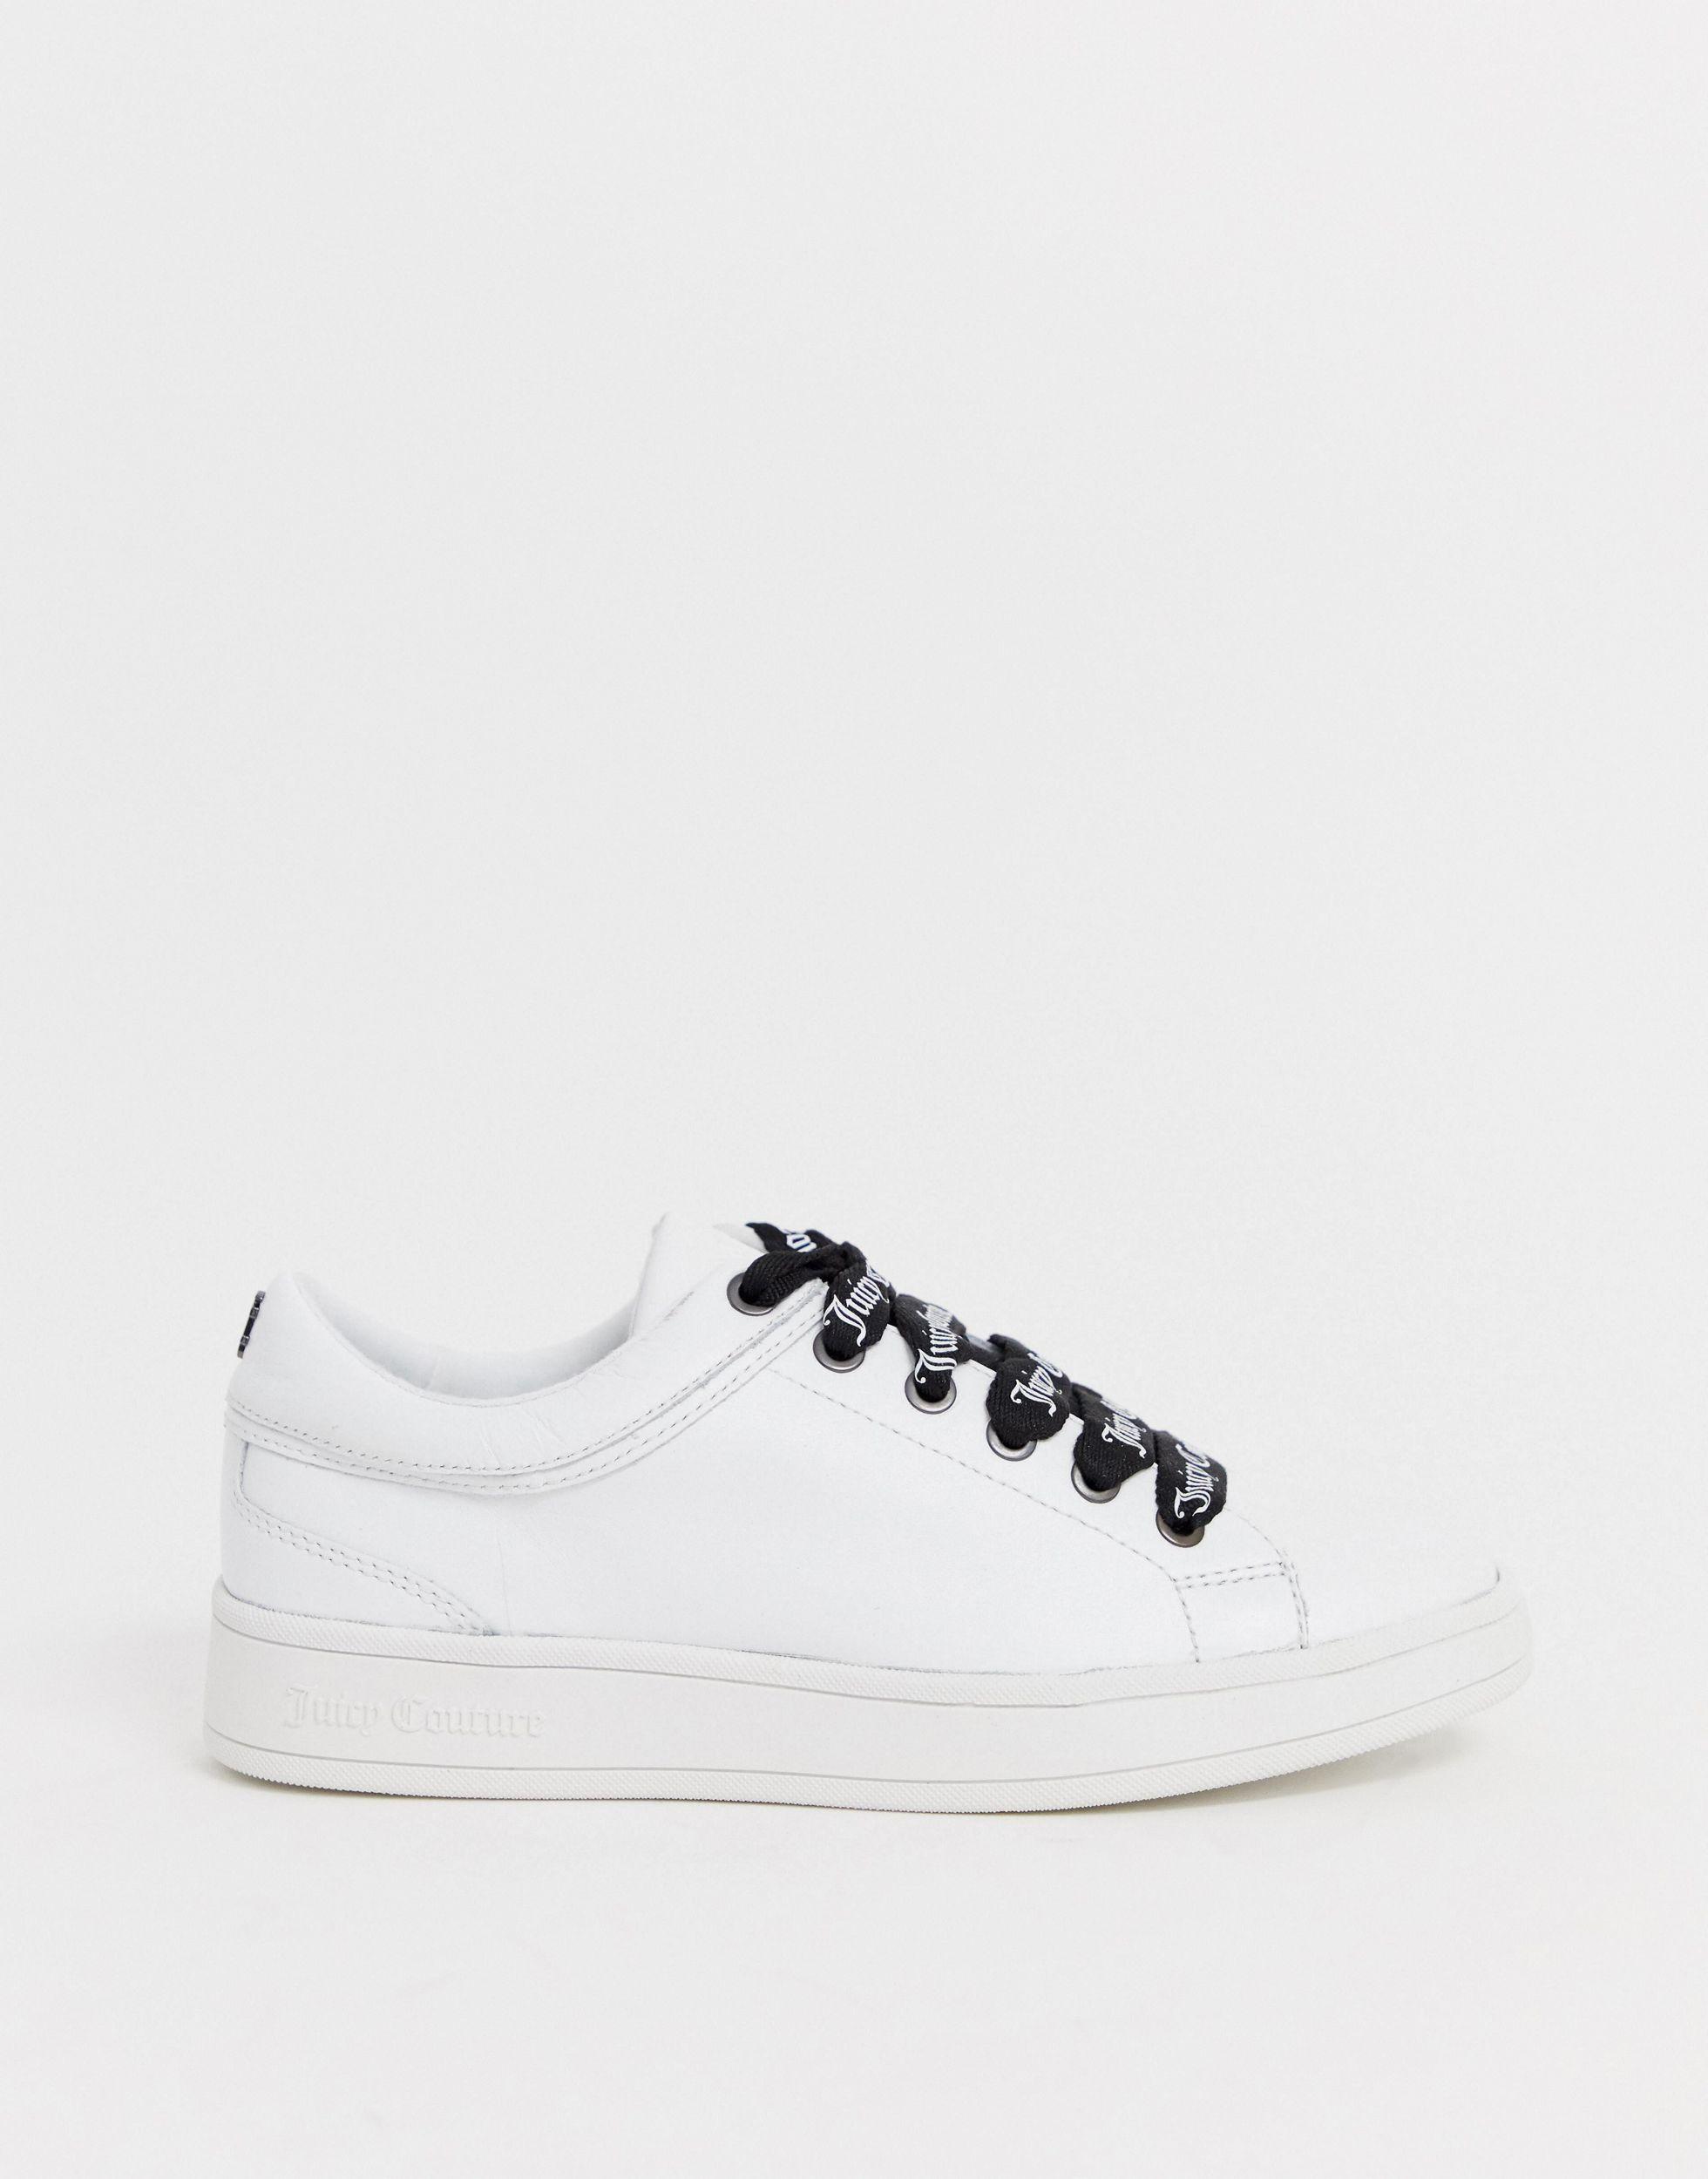 Juicy Couture Leather Lace Up Sneakers in White - Lyst